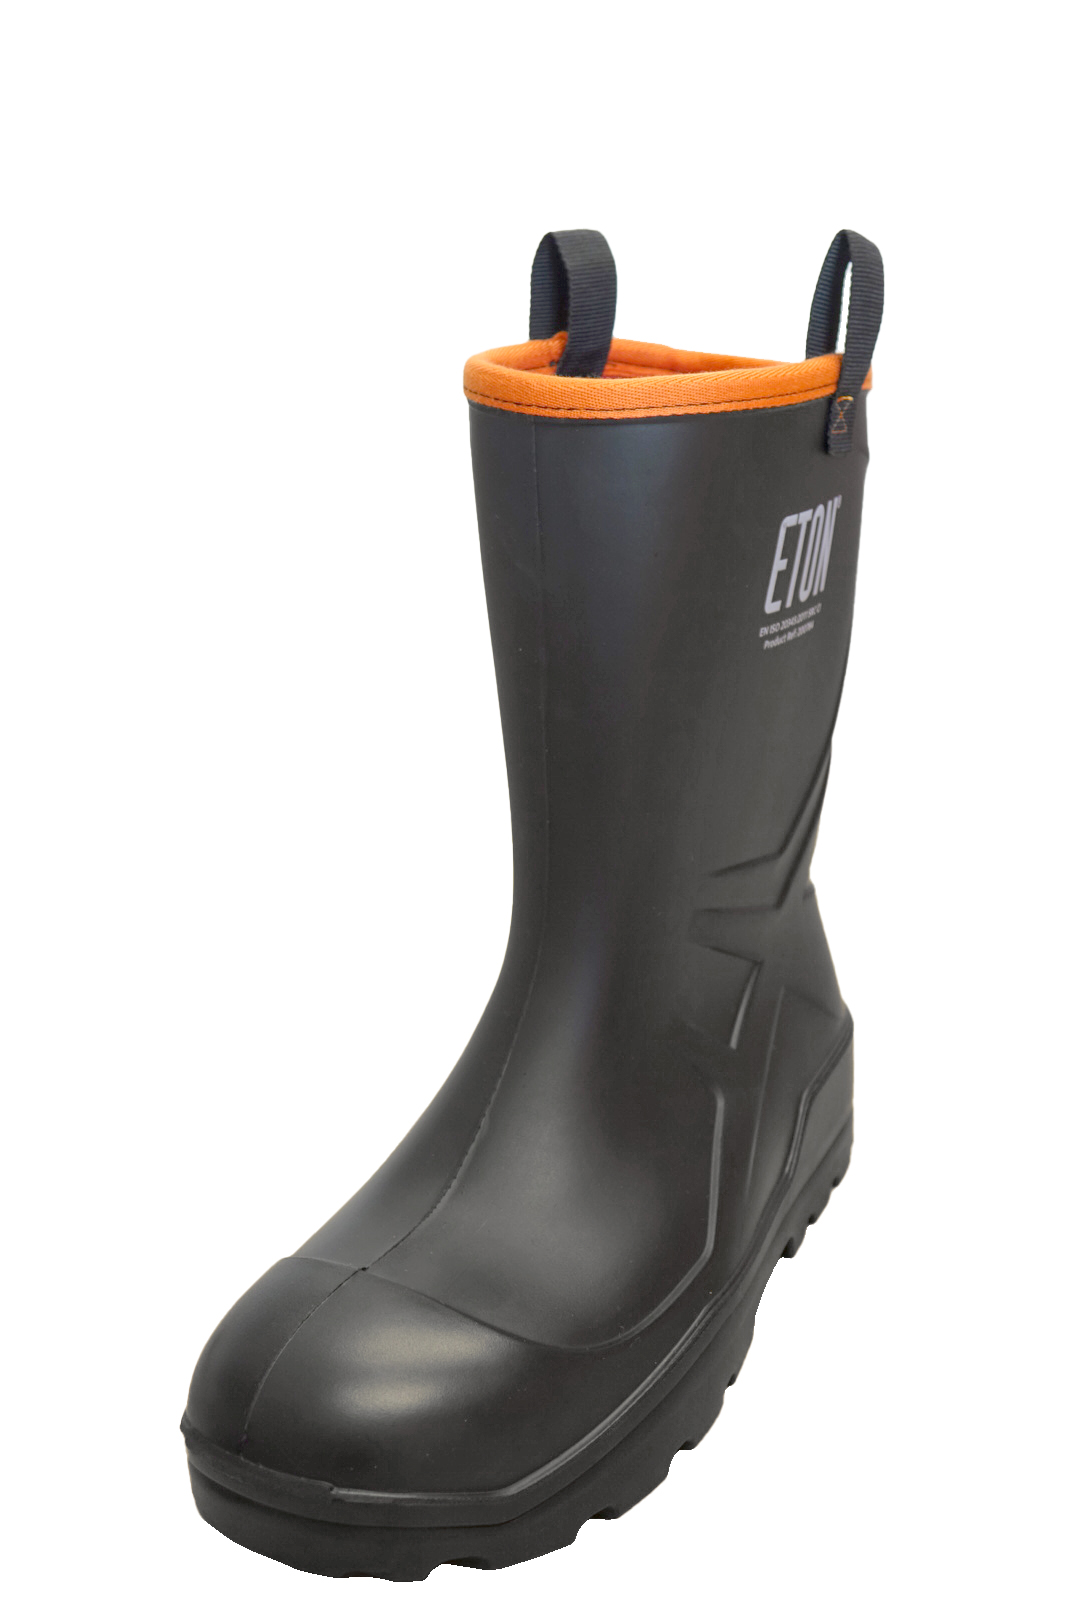 PU Rigger Boot Steel Full Safety Wellington - Size 5